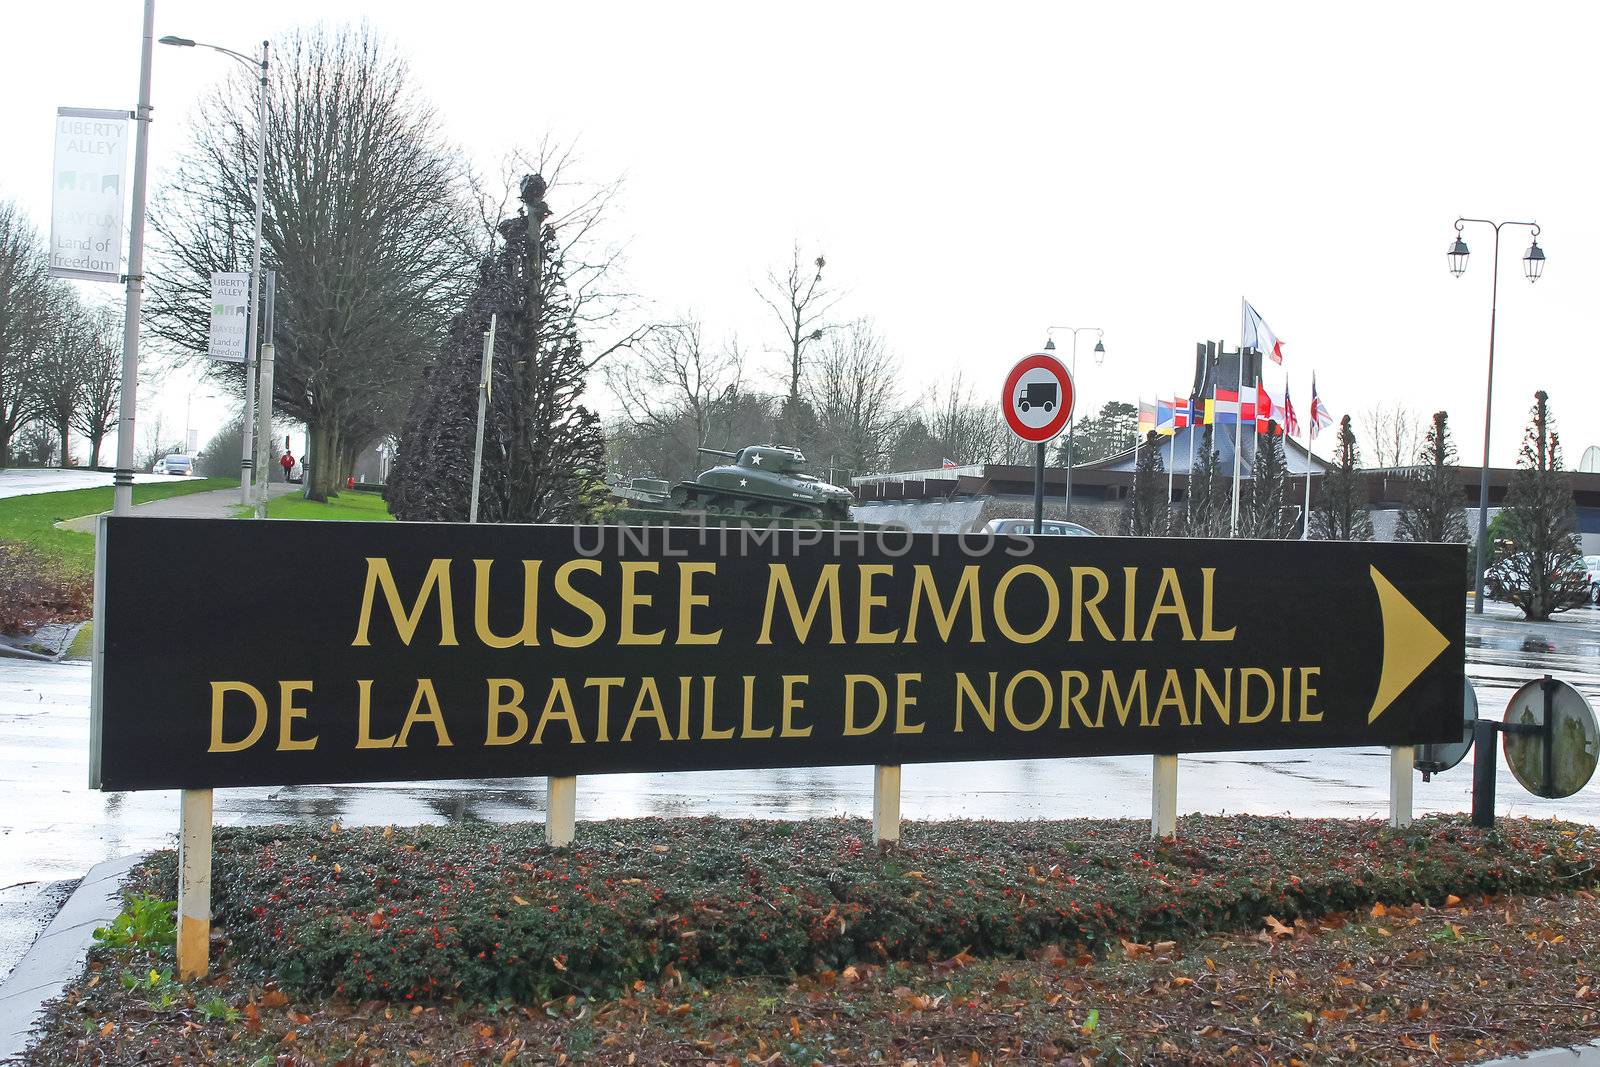 Memorial museum of the Battle of Normandy. France